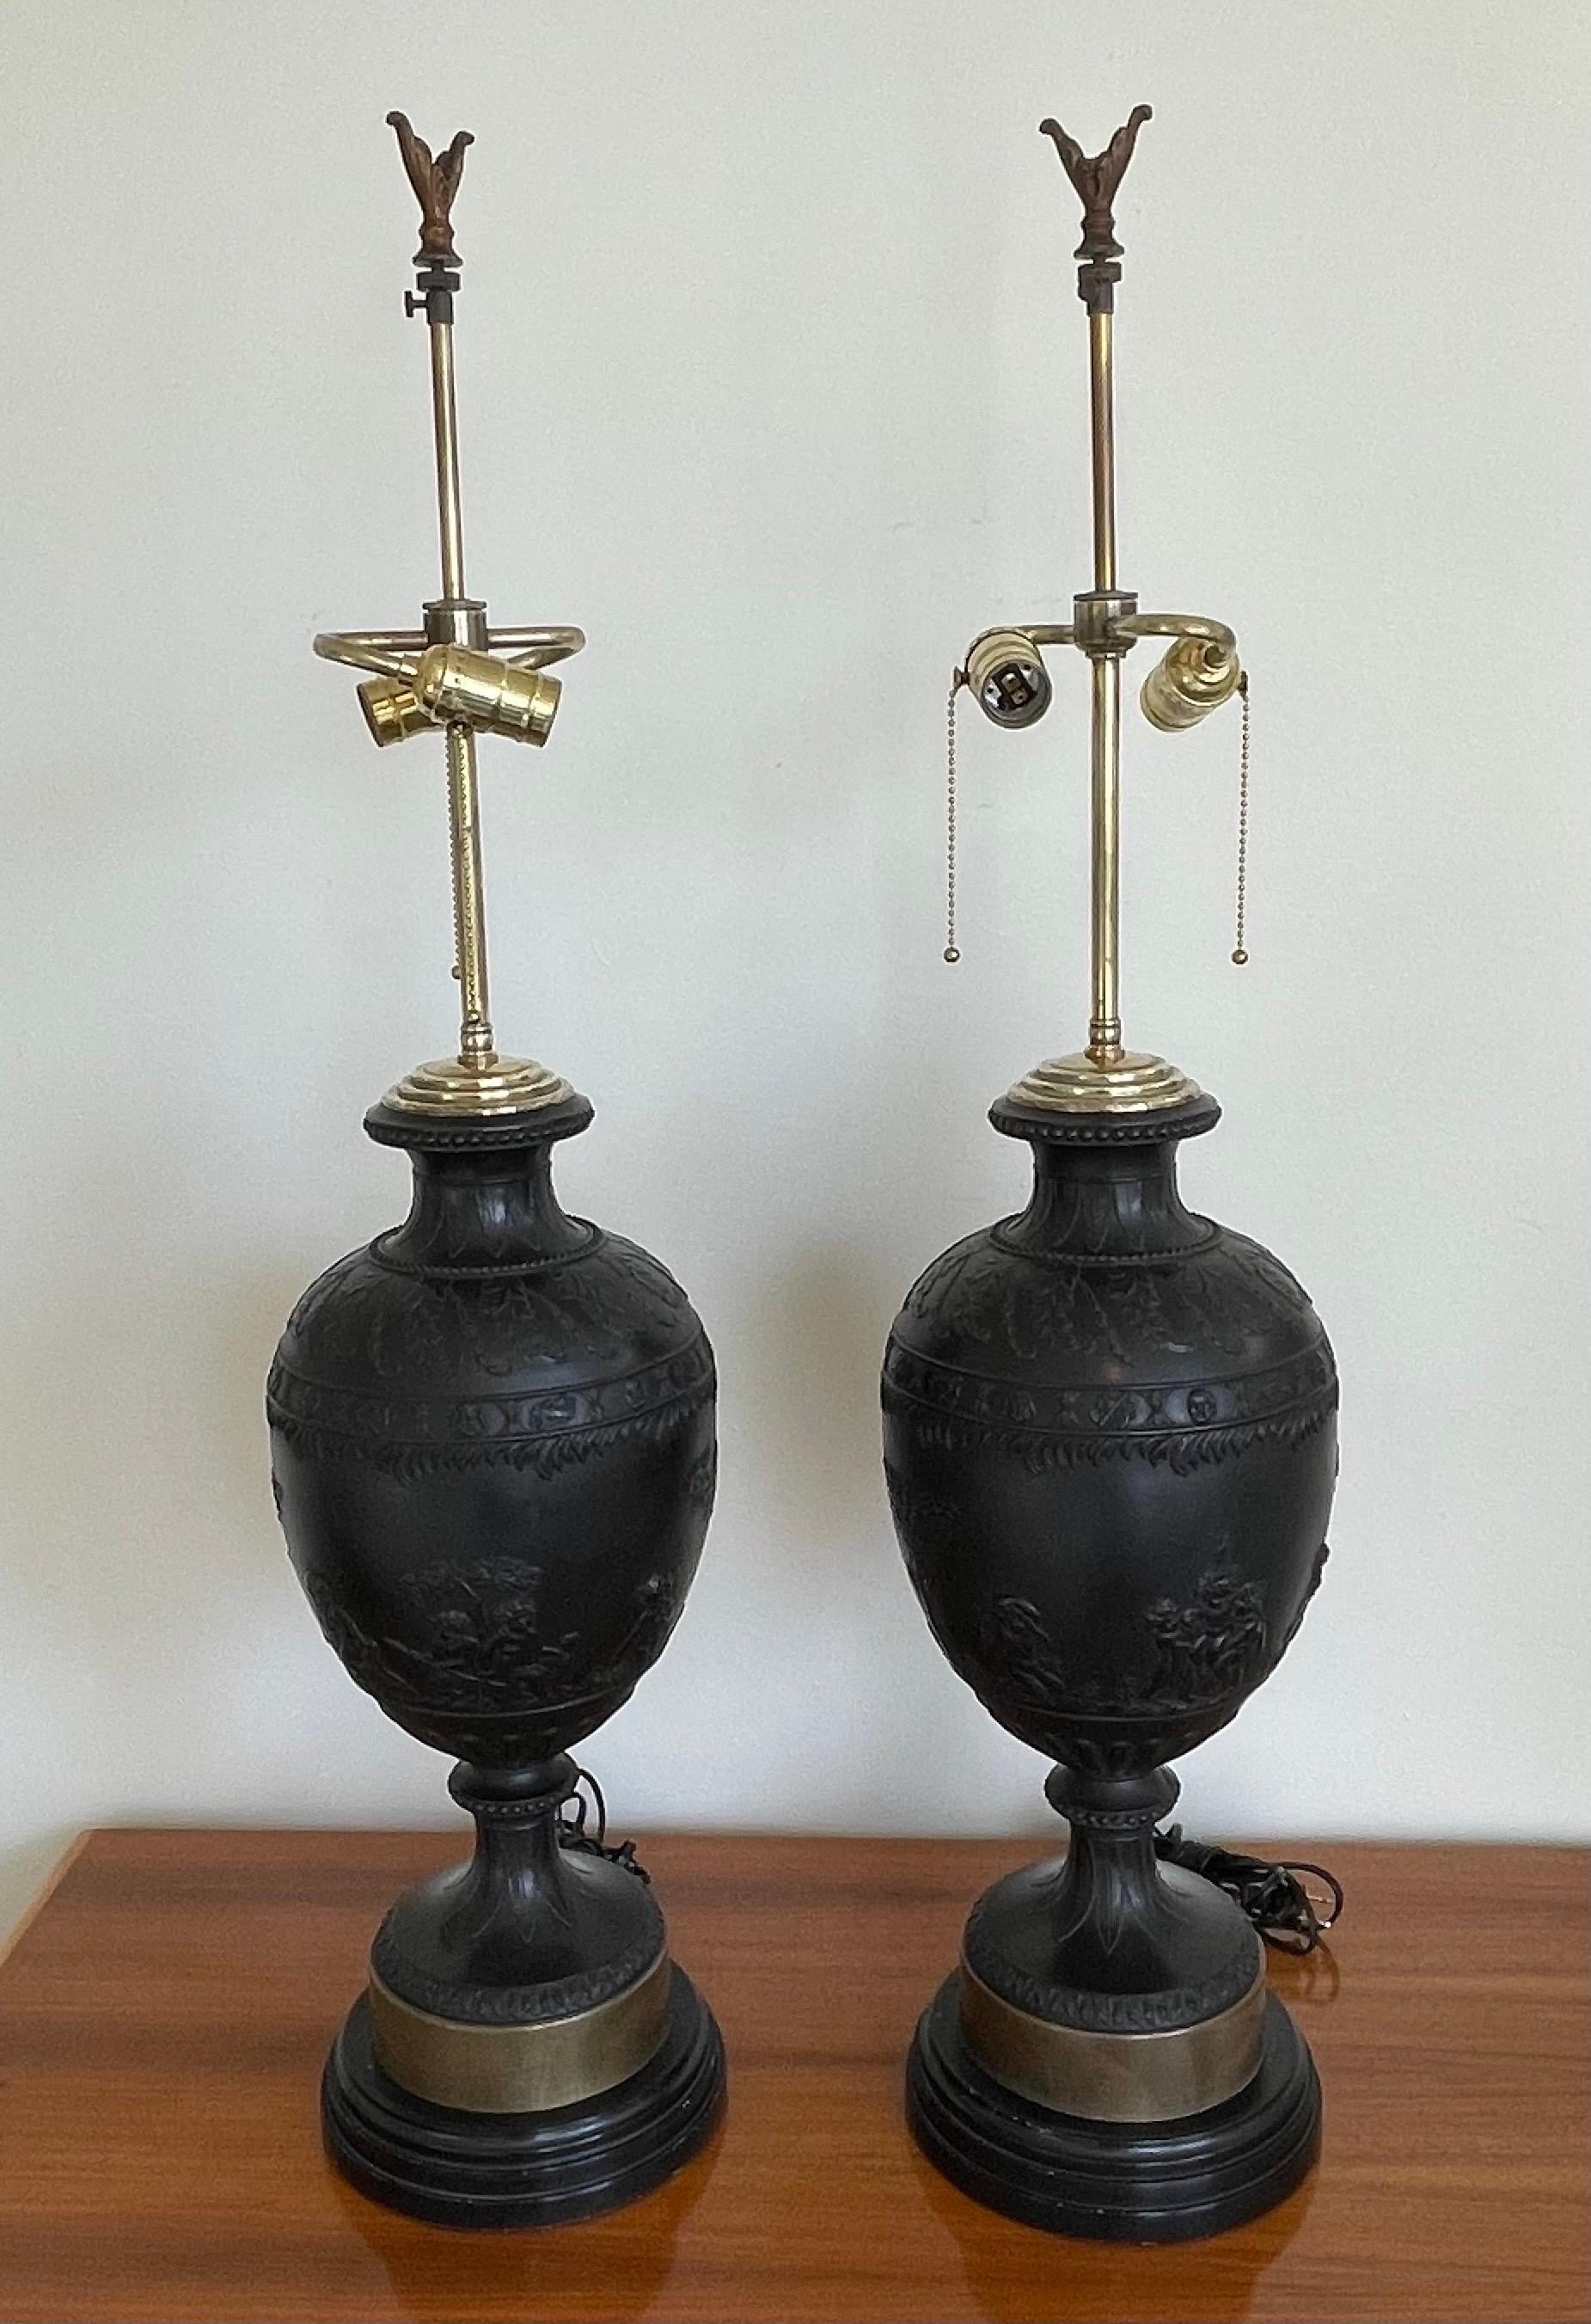 Monumental Pair of Black Basalt Table Lamps by Wedgwood, Late 19th Century For Sale 2